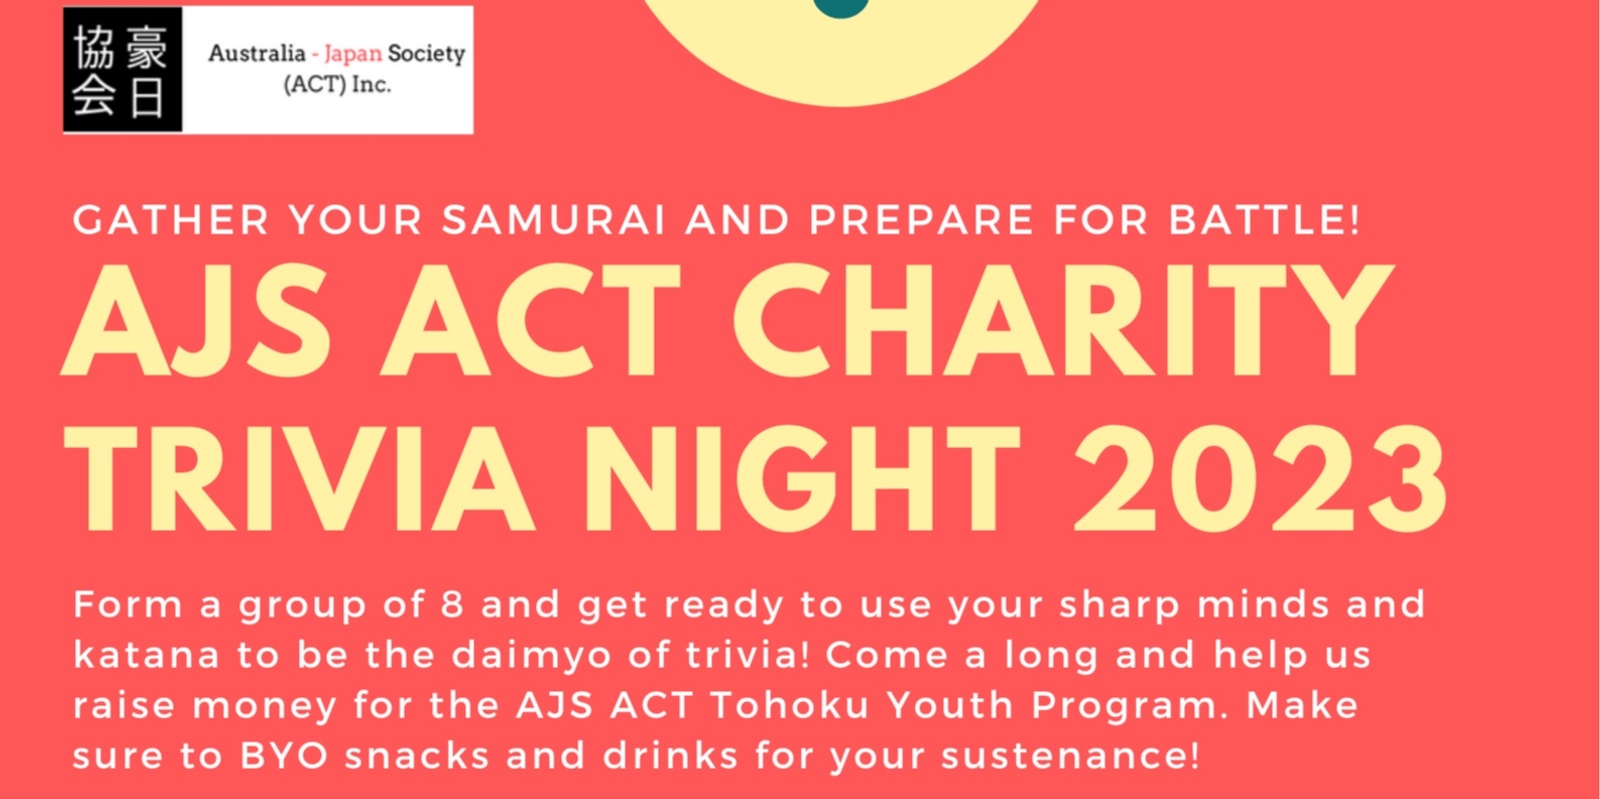 Banner image for AJS ACT CHARITY TRIVA NIGHT 2023